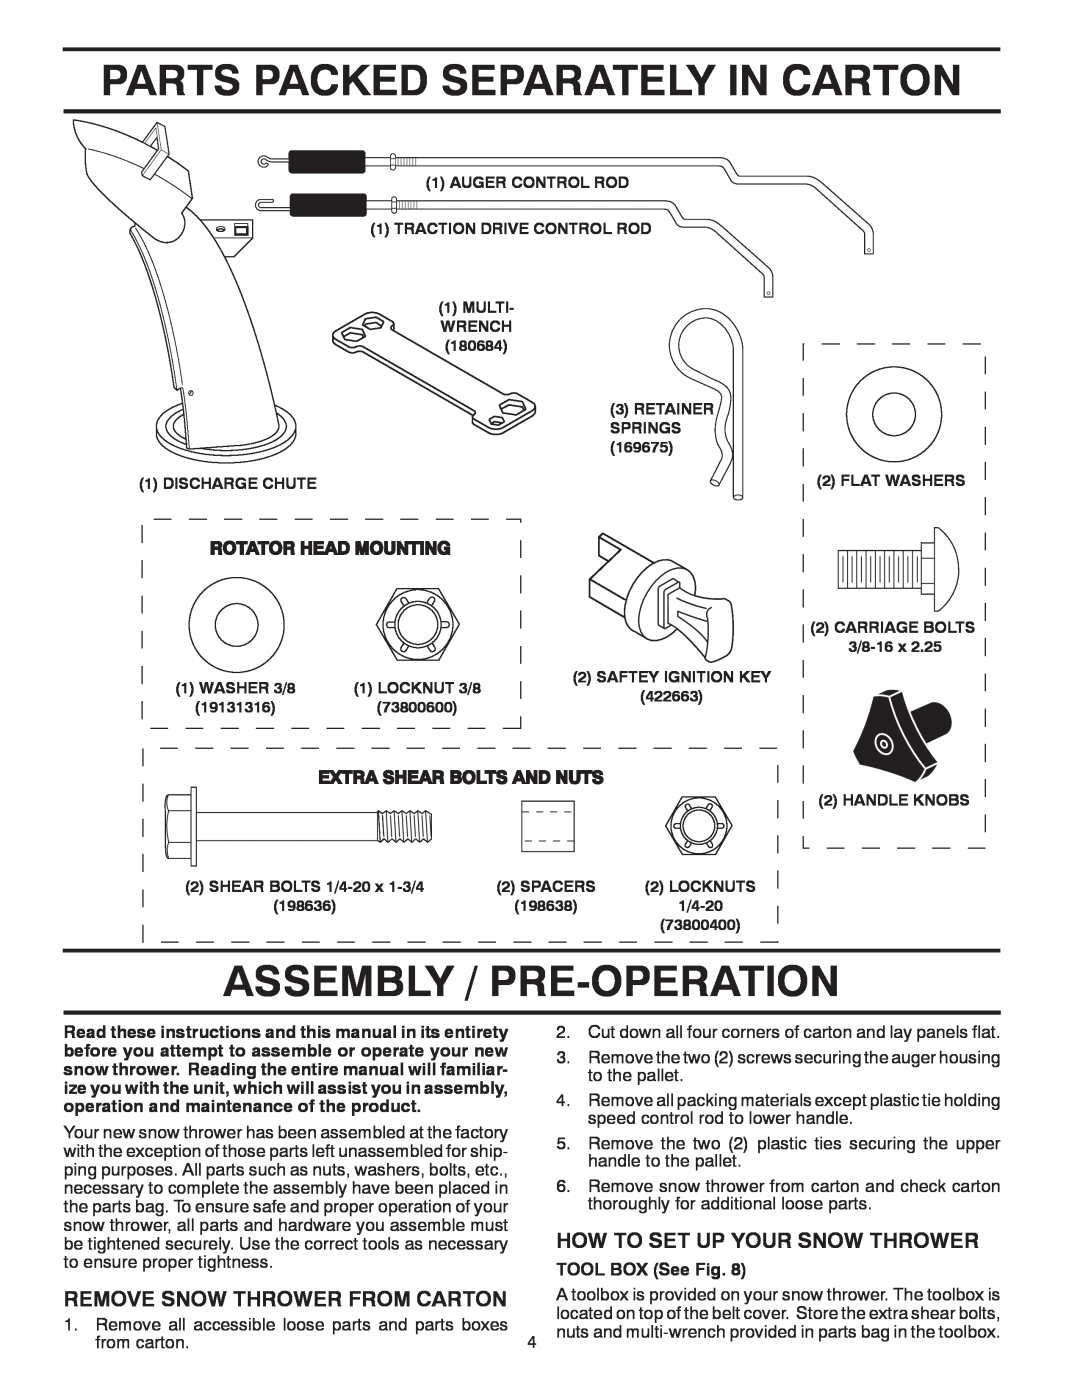 Poulan 421602 owner manual Parts Packed Separately In Carton, Assembly / Pre-Operation, How To Set Up Your Snow Thrower 